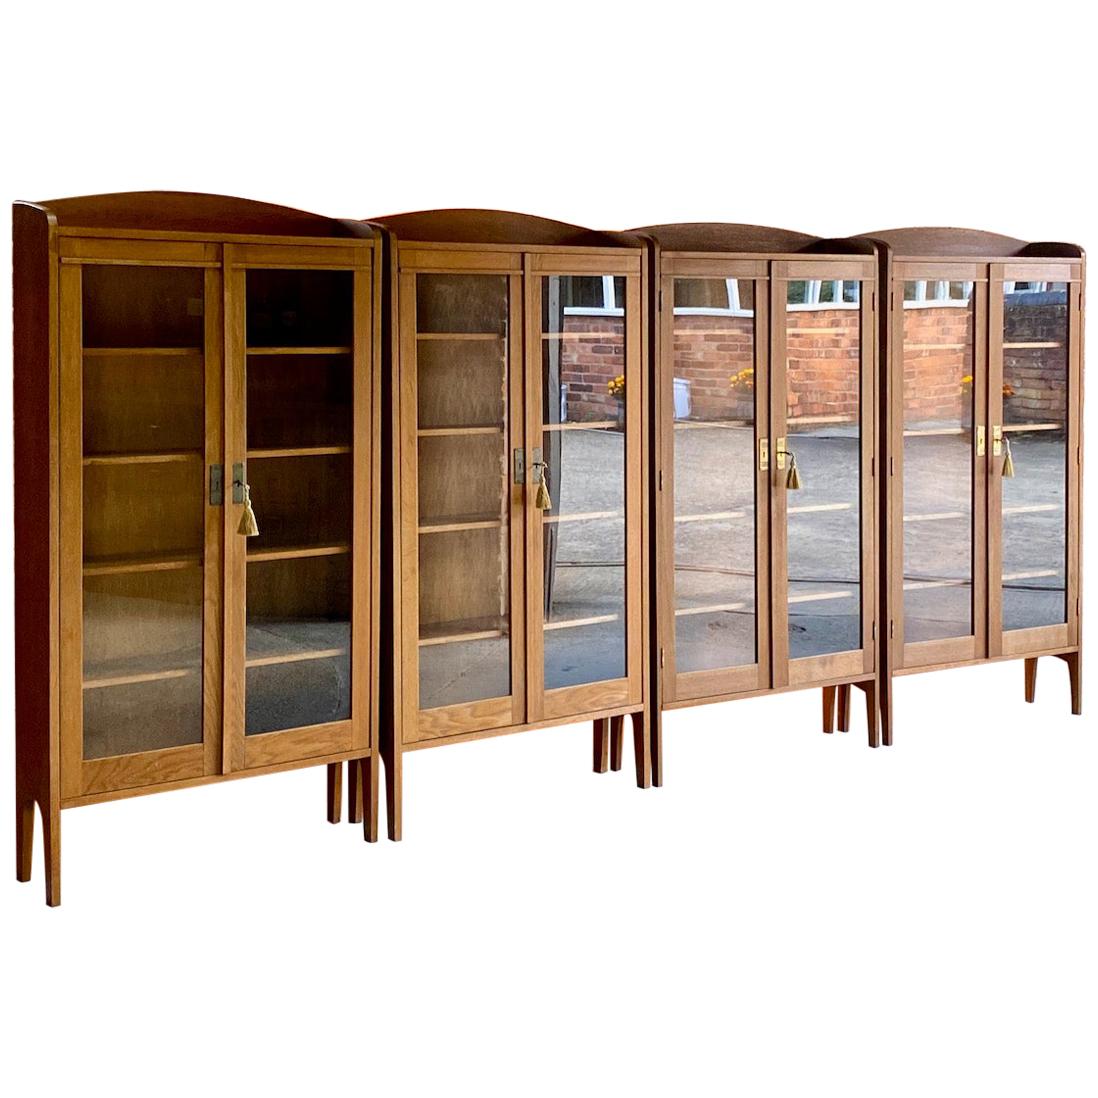 Antique Oak Library Bookcases Set of Four German Aesthetic Movement circa 1920